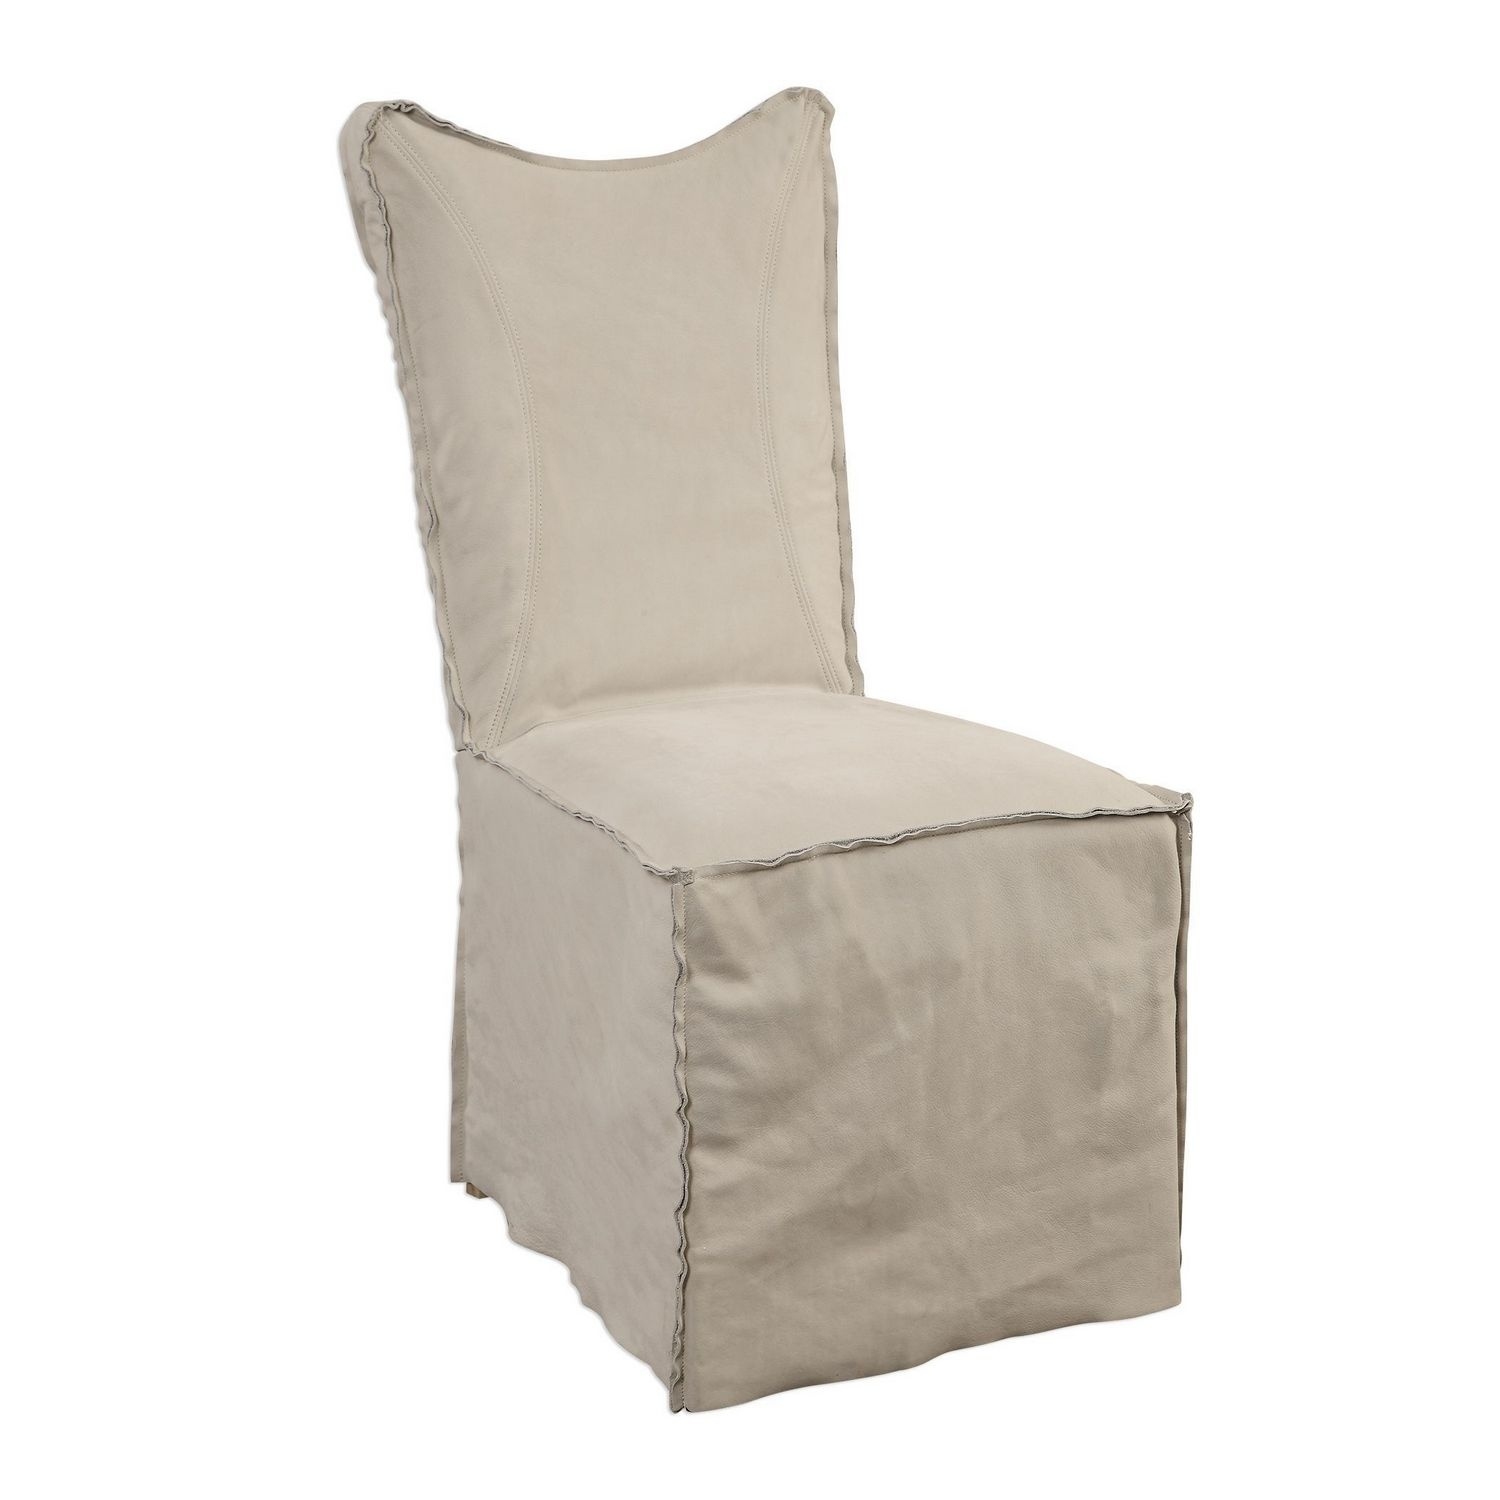 Uttermost Delroy Armless Chairs - Set of 2 - Stone Ivory